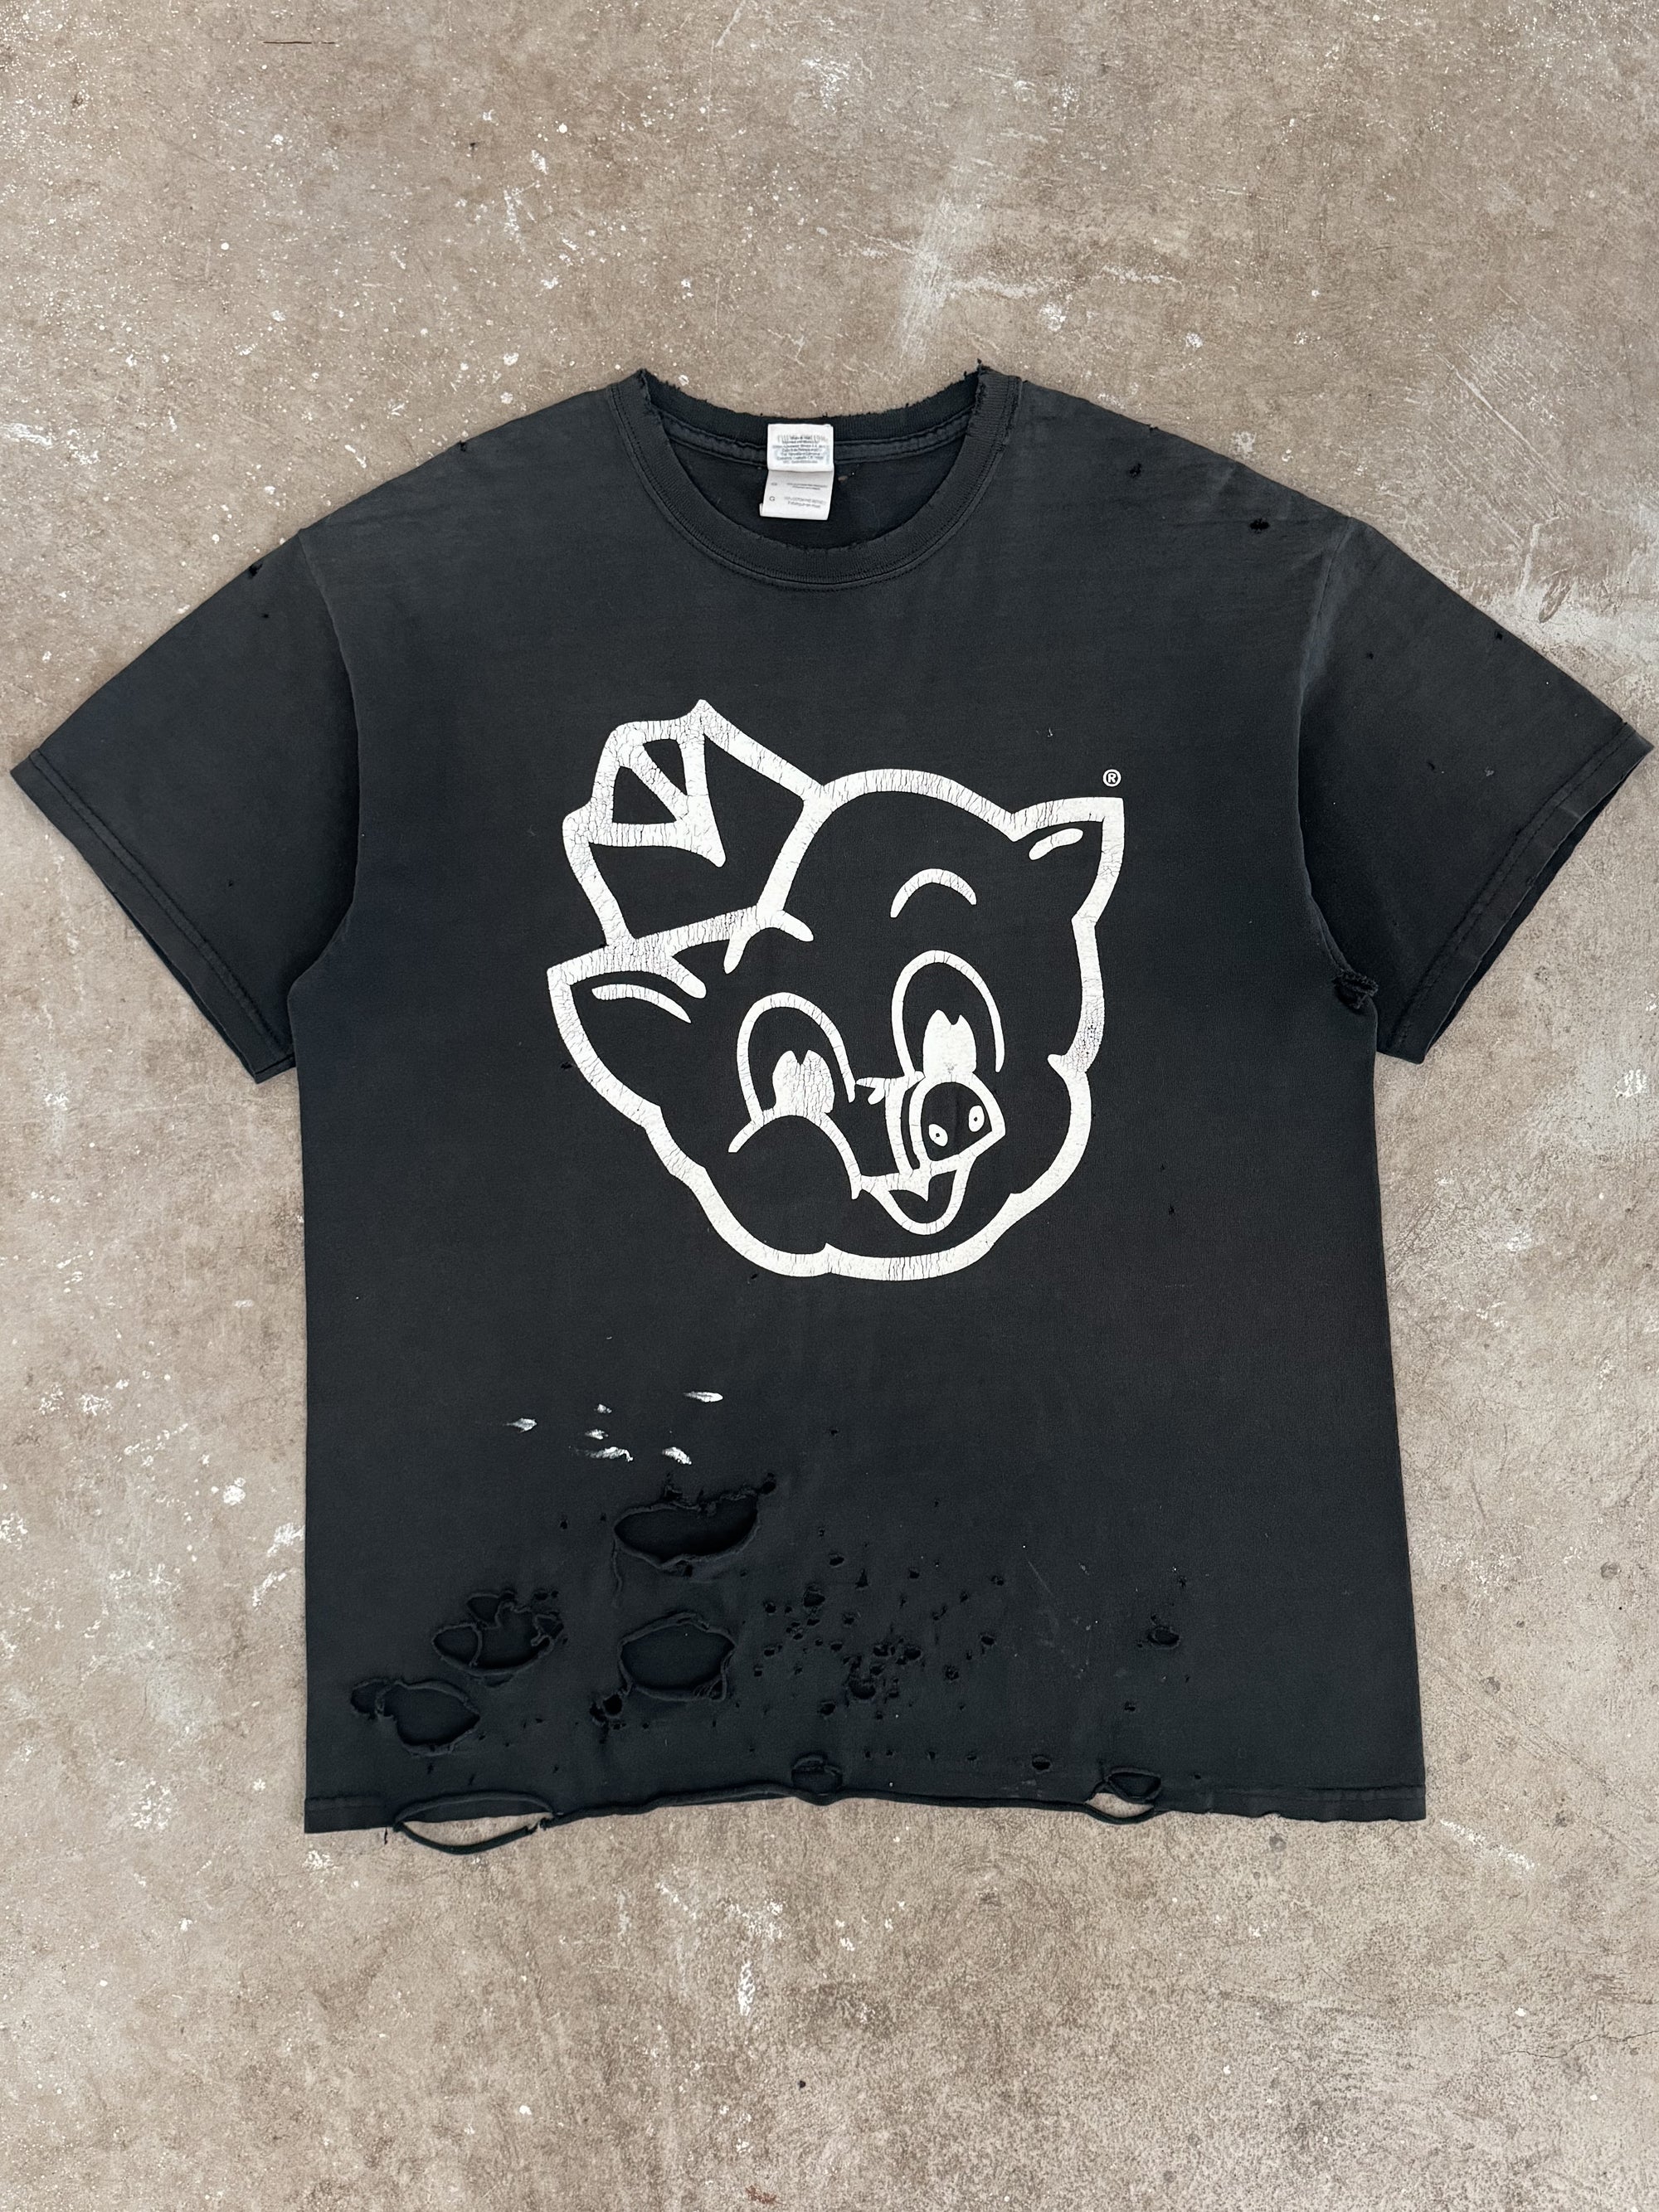 2000s "Piggly Wiggly" Thrashed Tee (L)